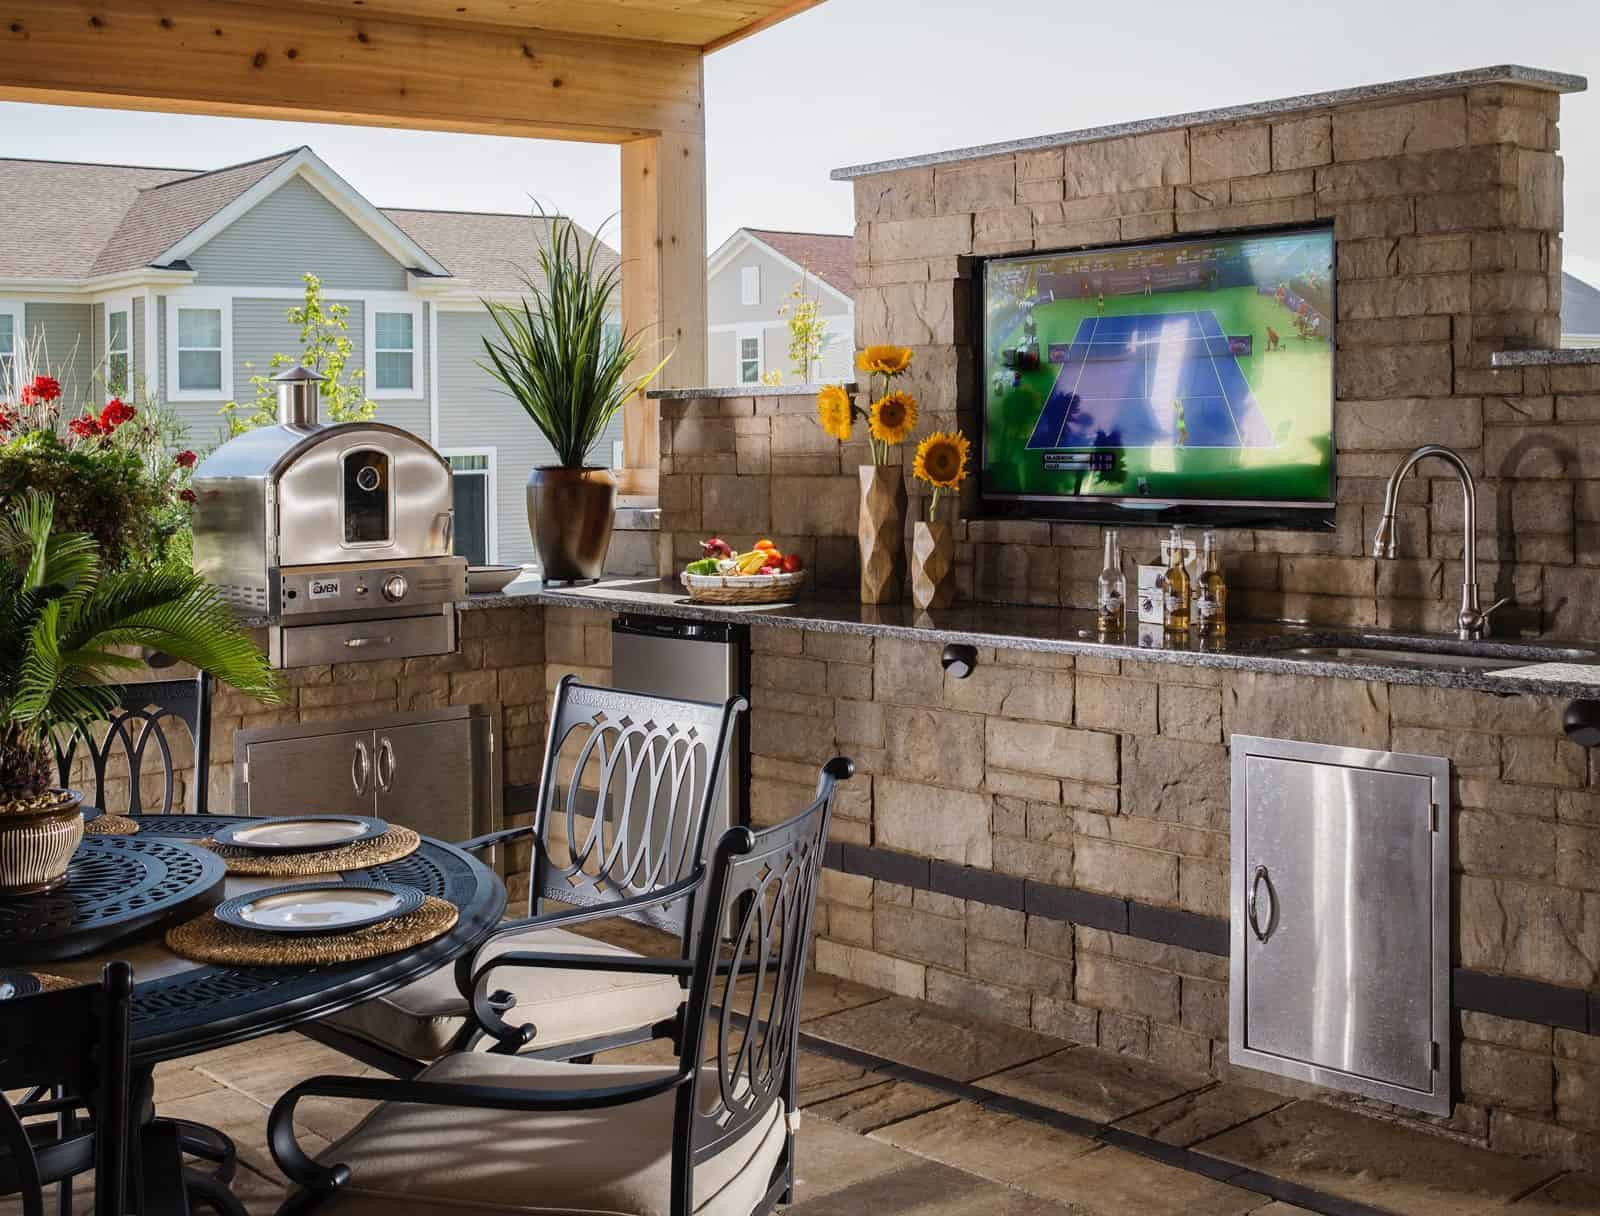 Outdoor Kitchen Ideas
 Outdoor Kitchen Ideas That Will Make You Drool